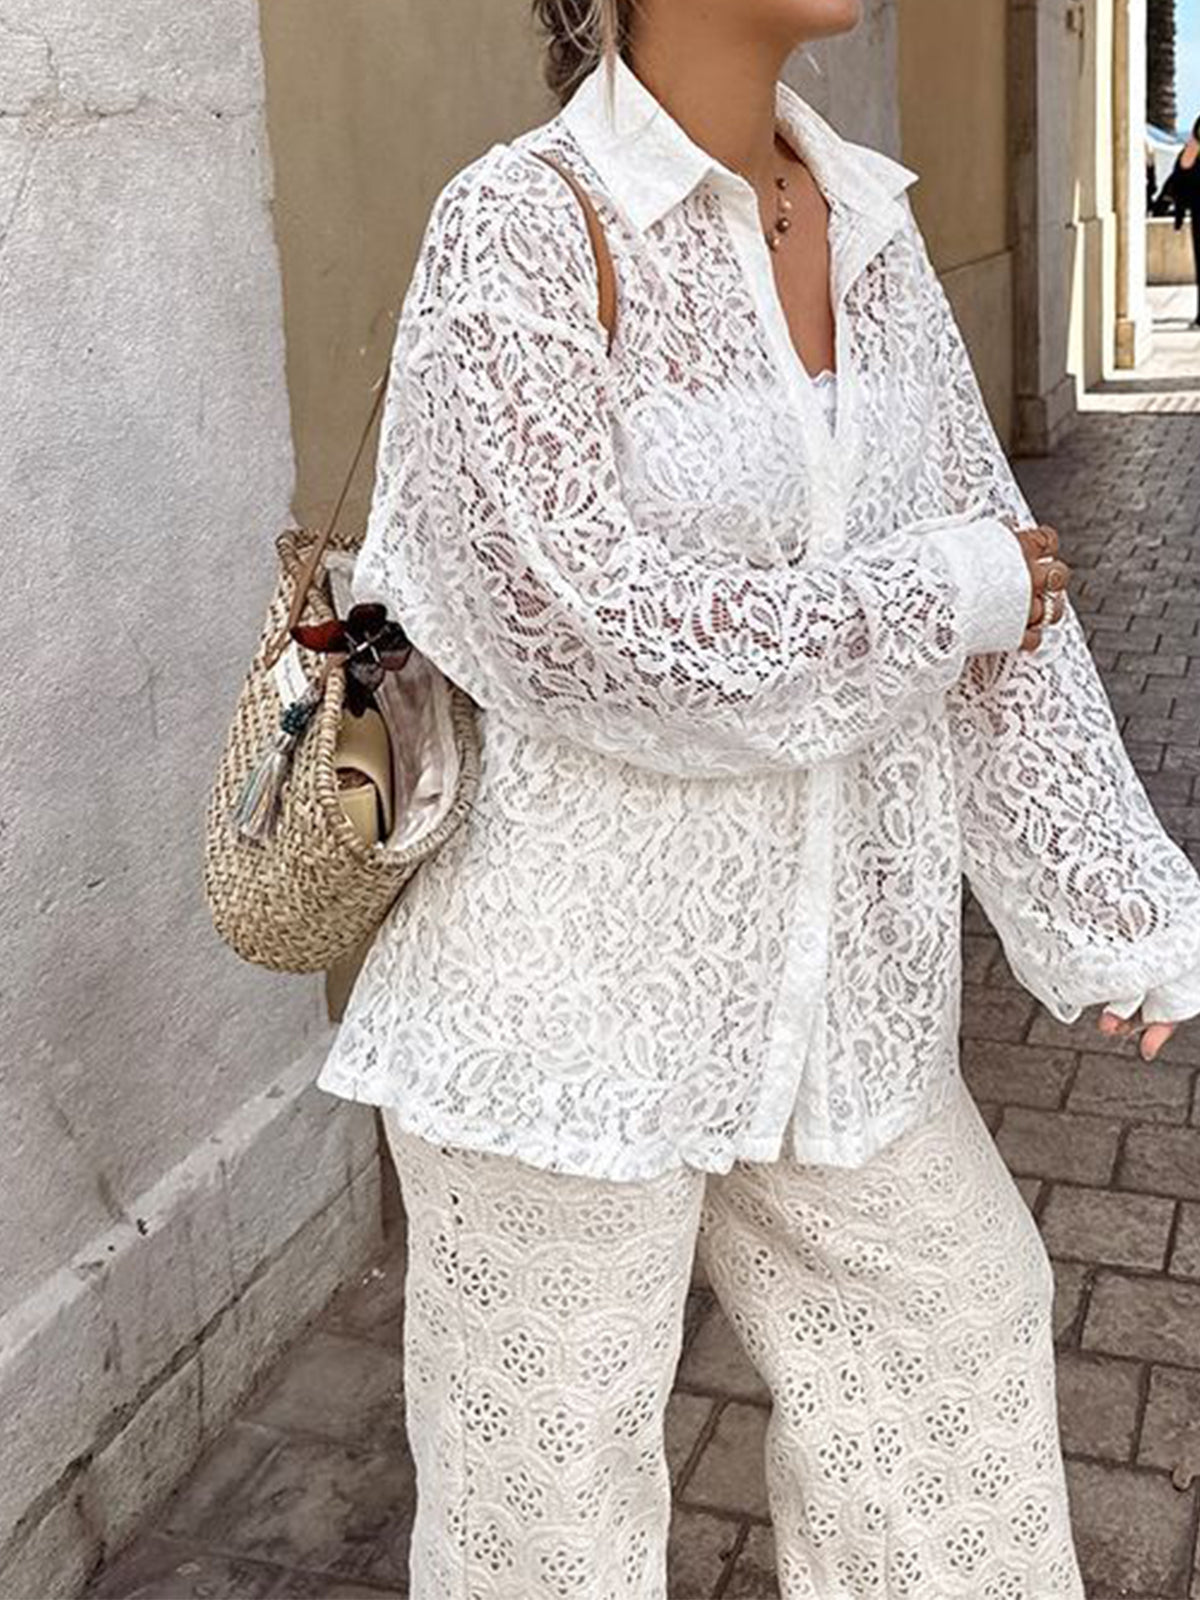 Floral Lace Cover Up Shirt